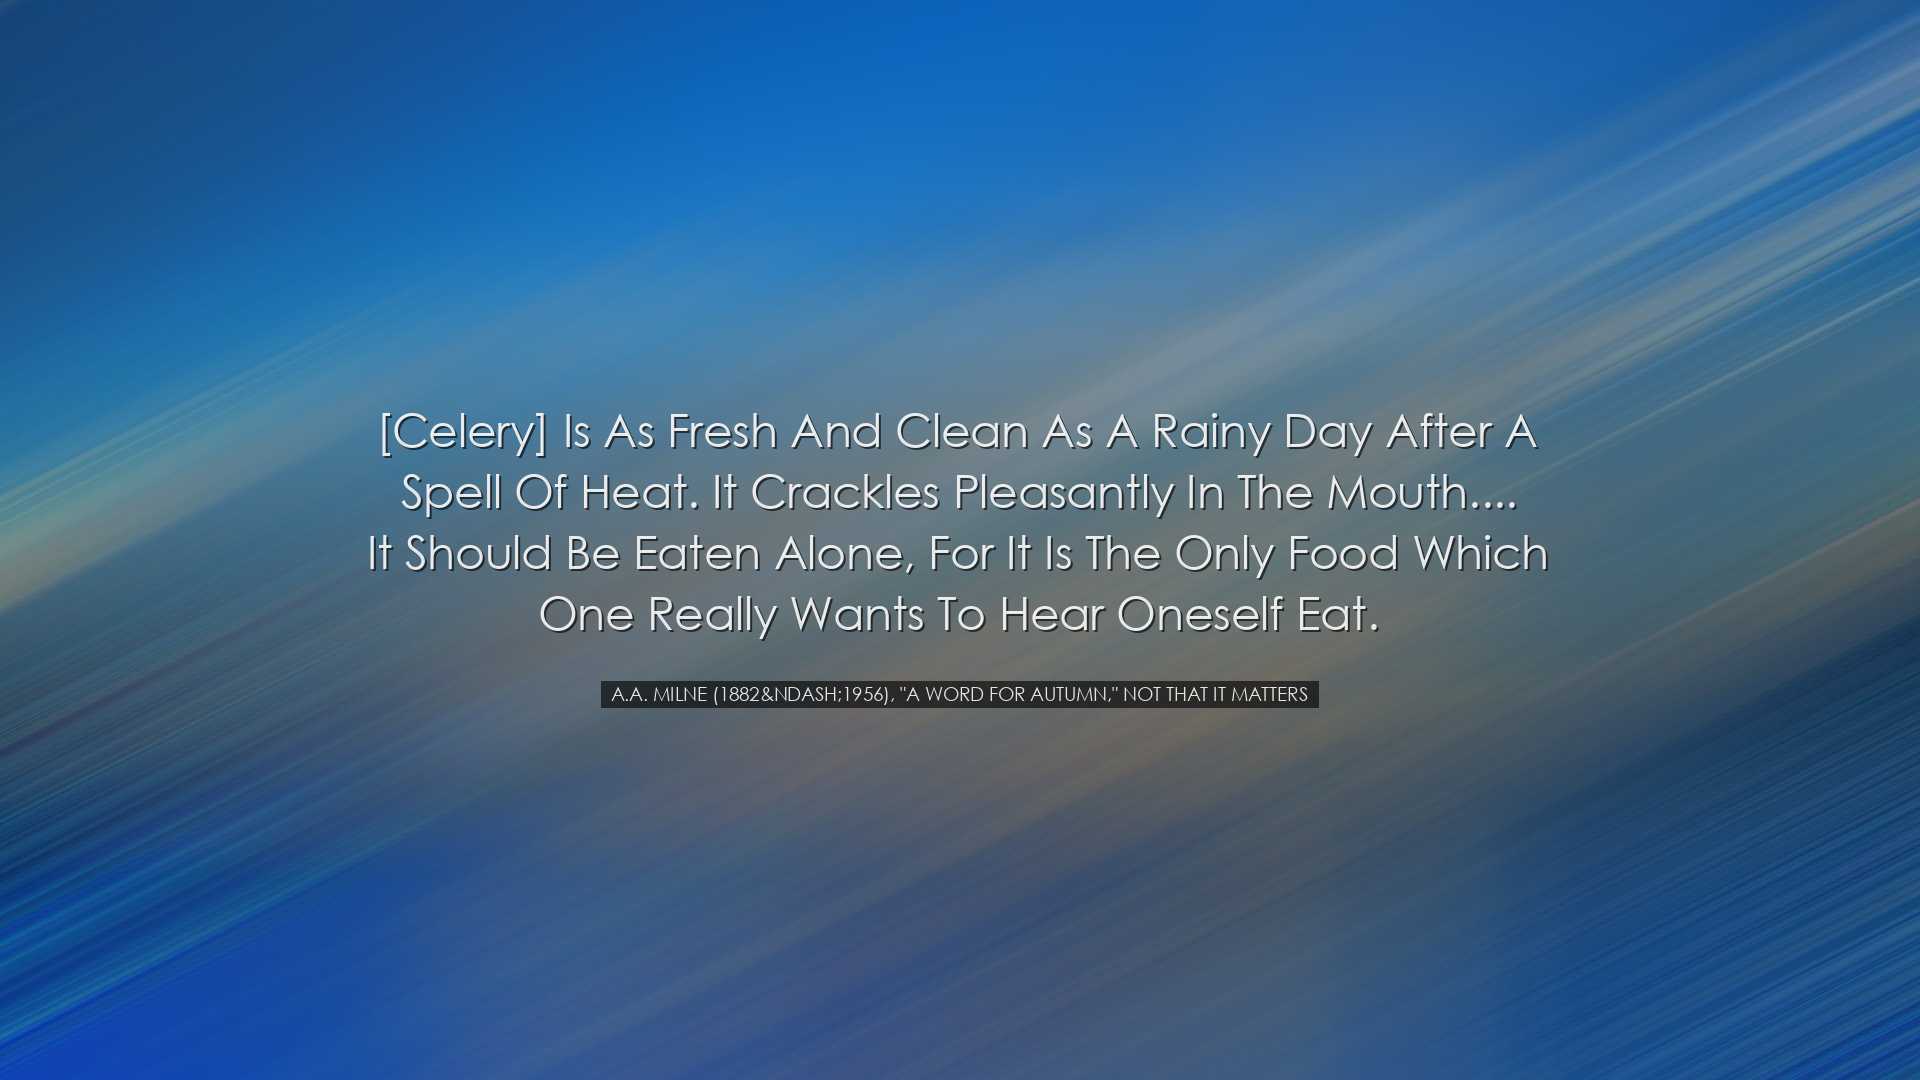 [Celery] is as fresh and clean as a rainy day after a spell of hea